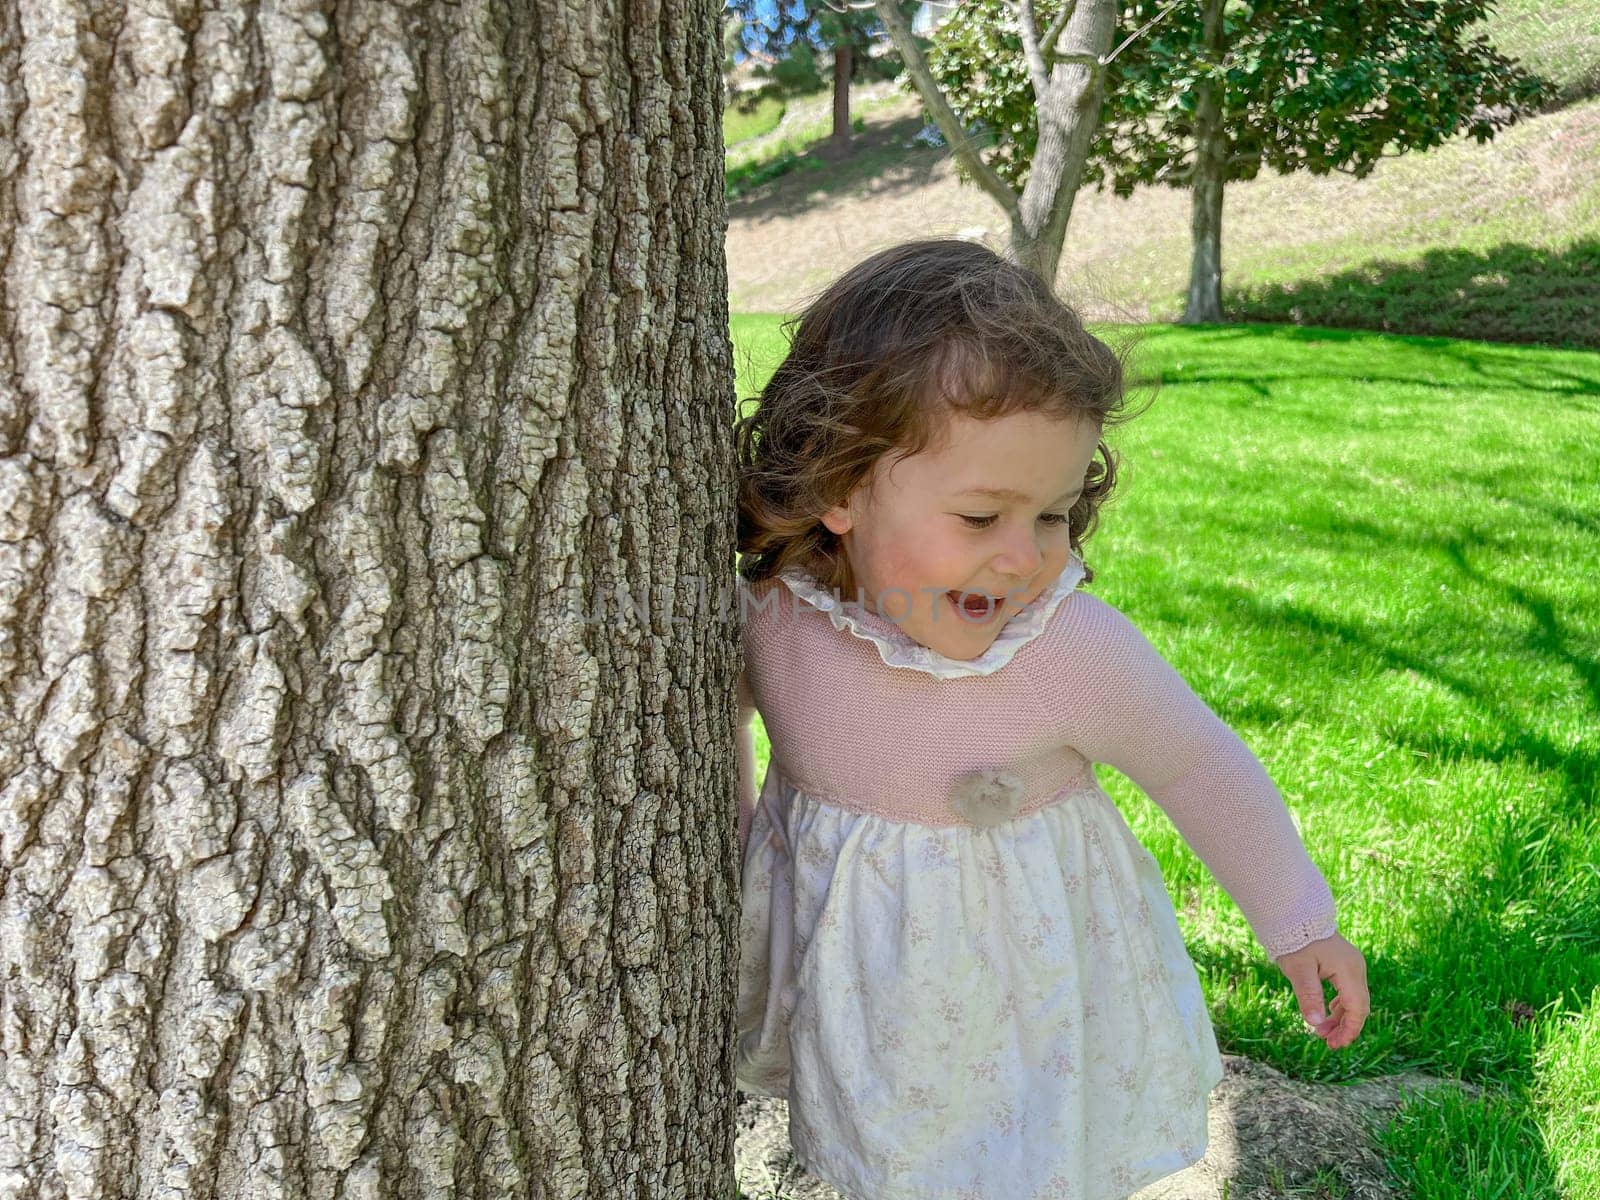 Cute little girl is playing around the grass and trees at the park